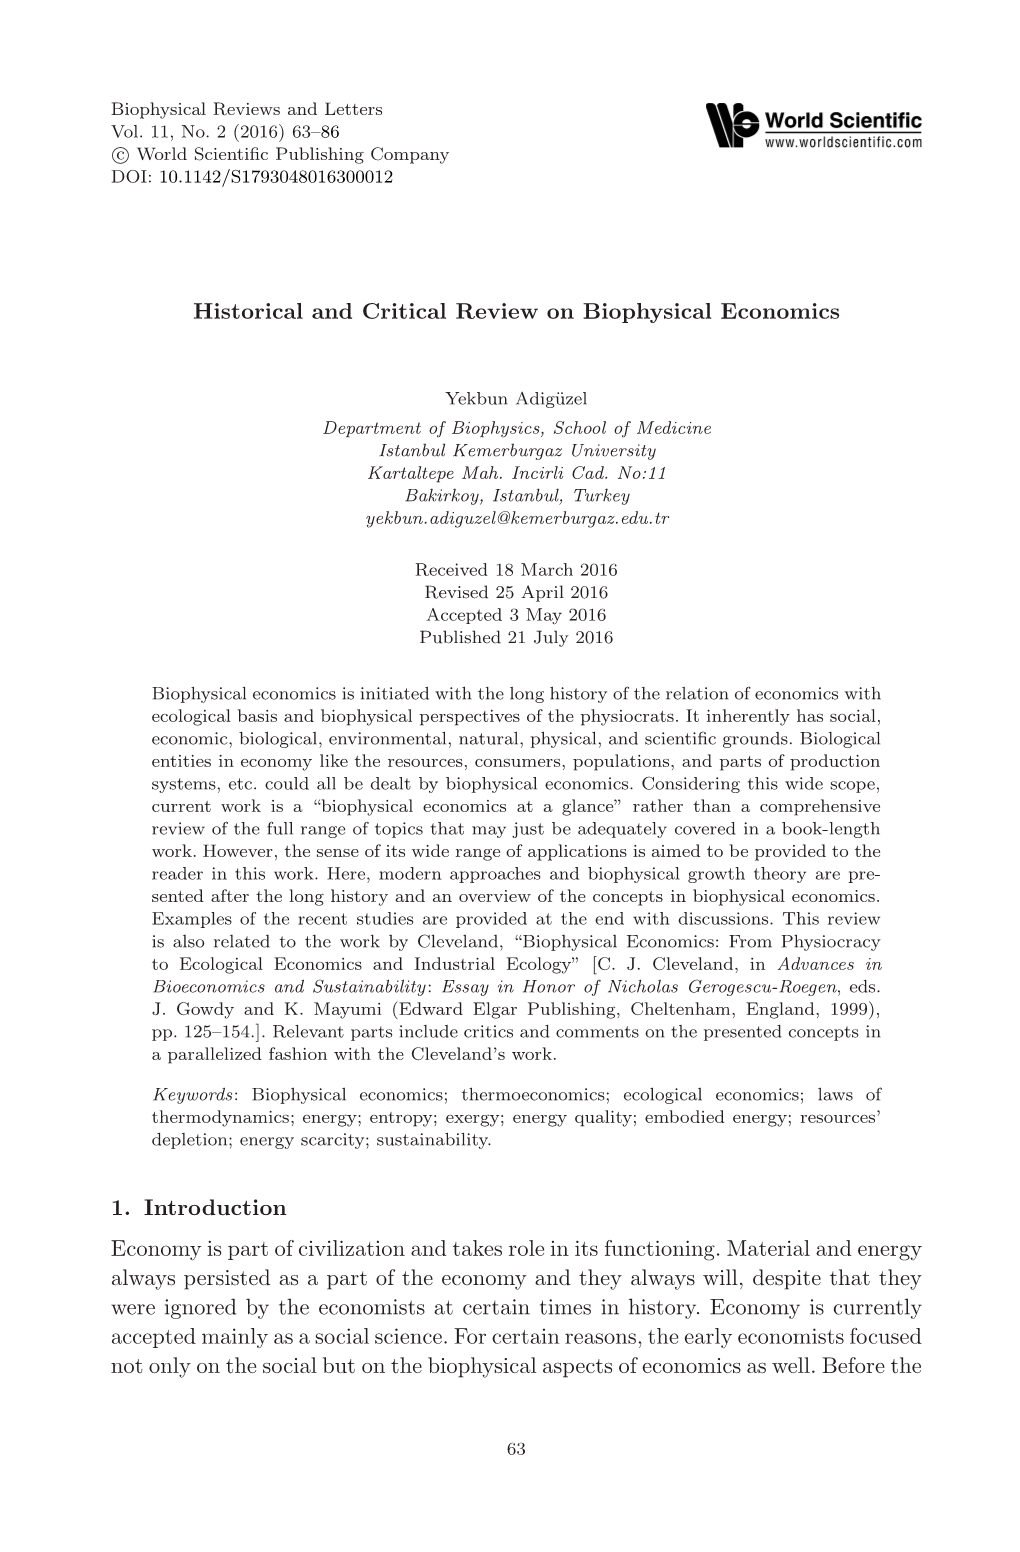 Historical and Critical Review on Biophysical Economics 1